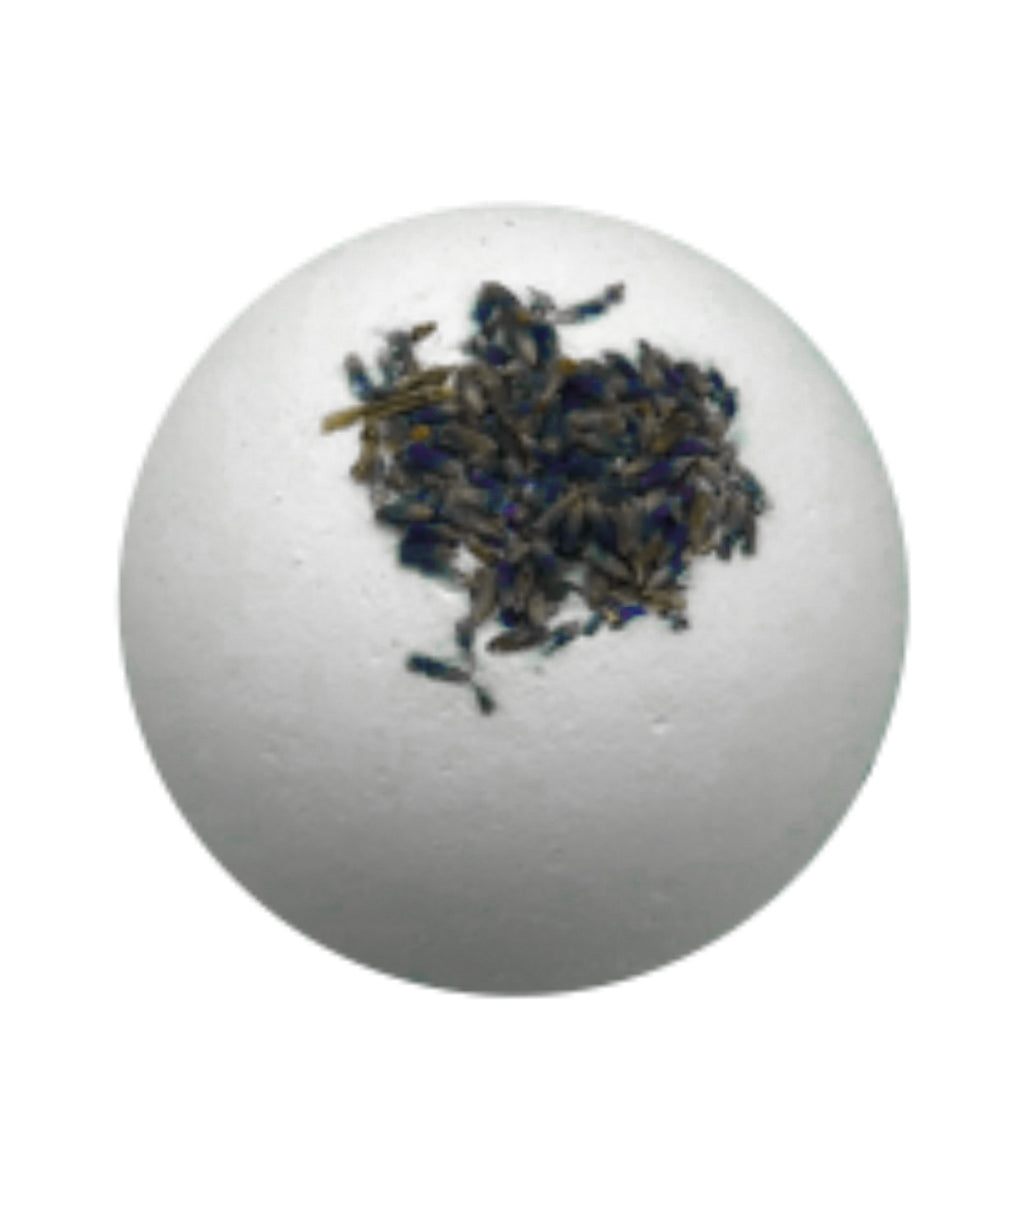 Relaxing - Lavender + Dried Lavender Buds Organic Bath Bombs